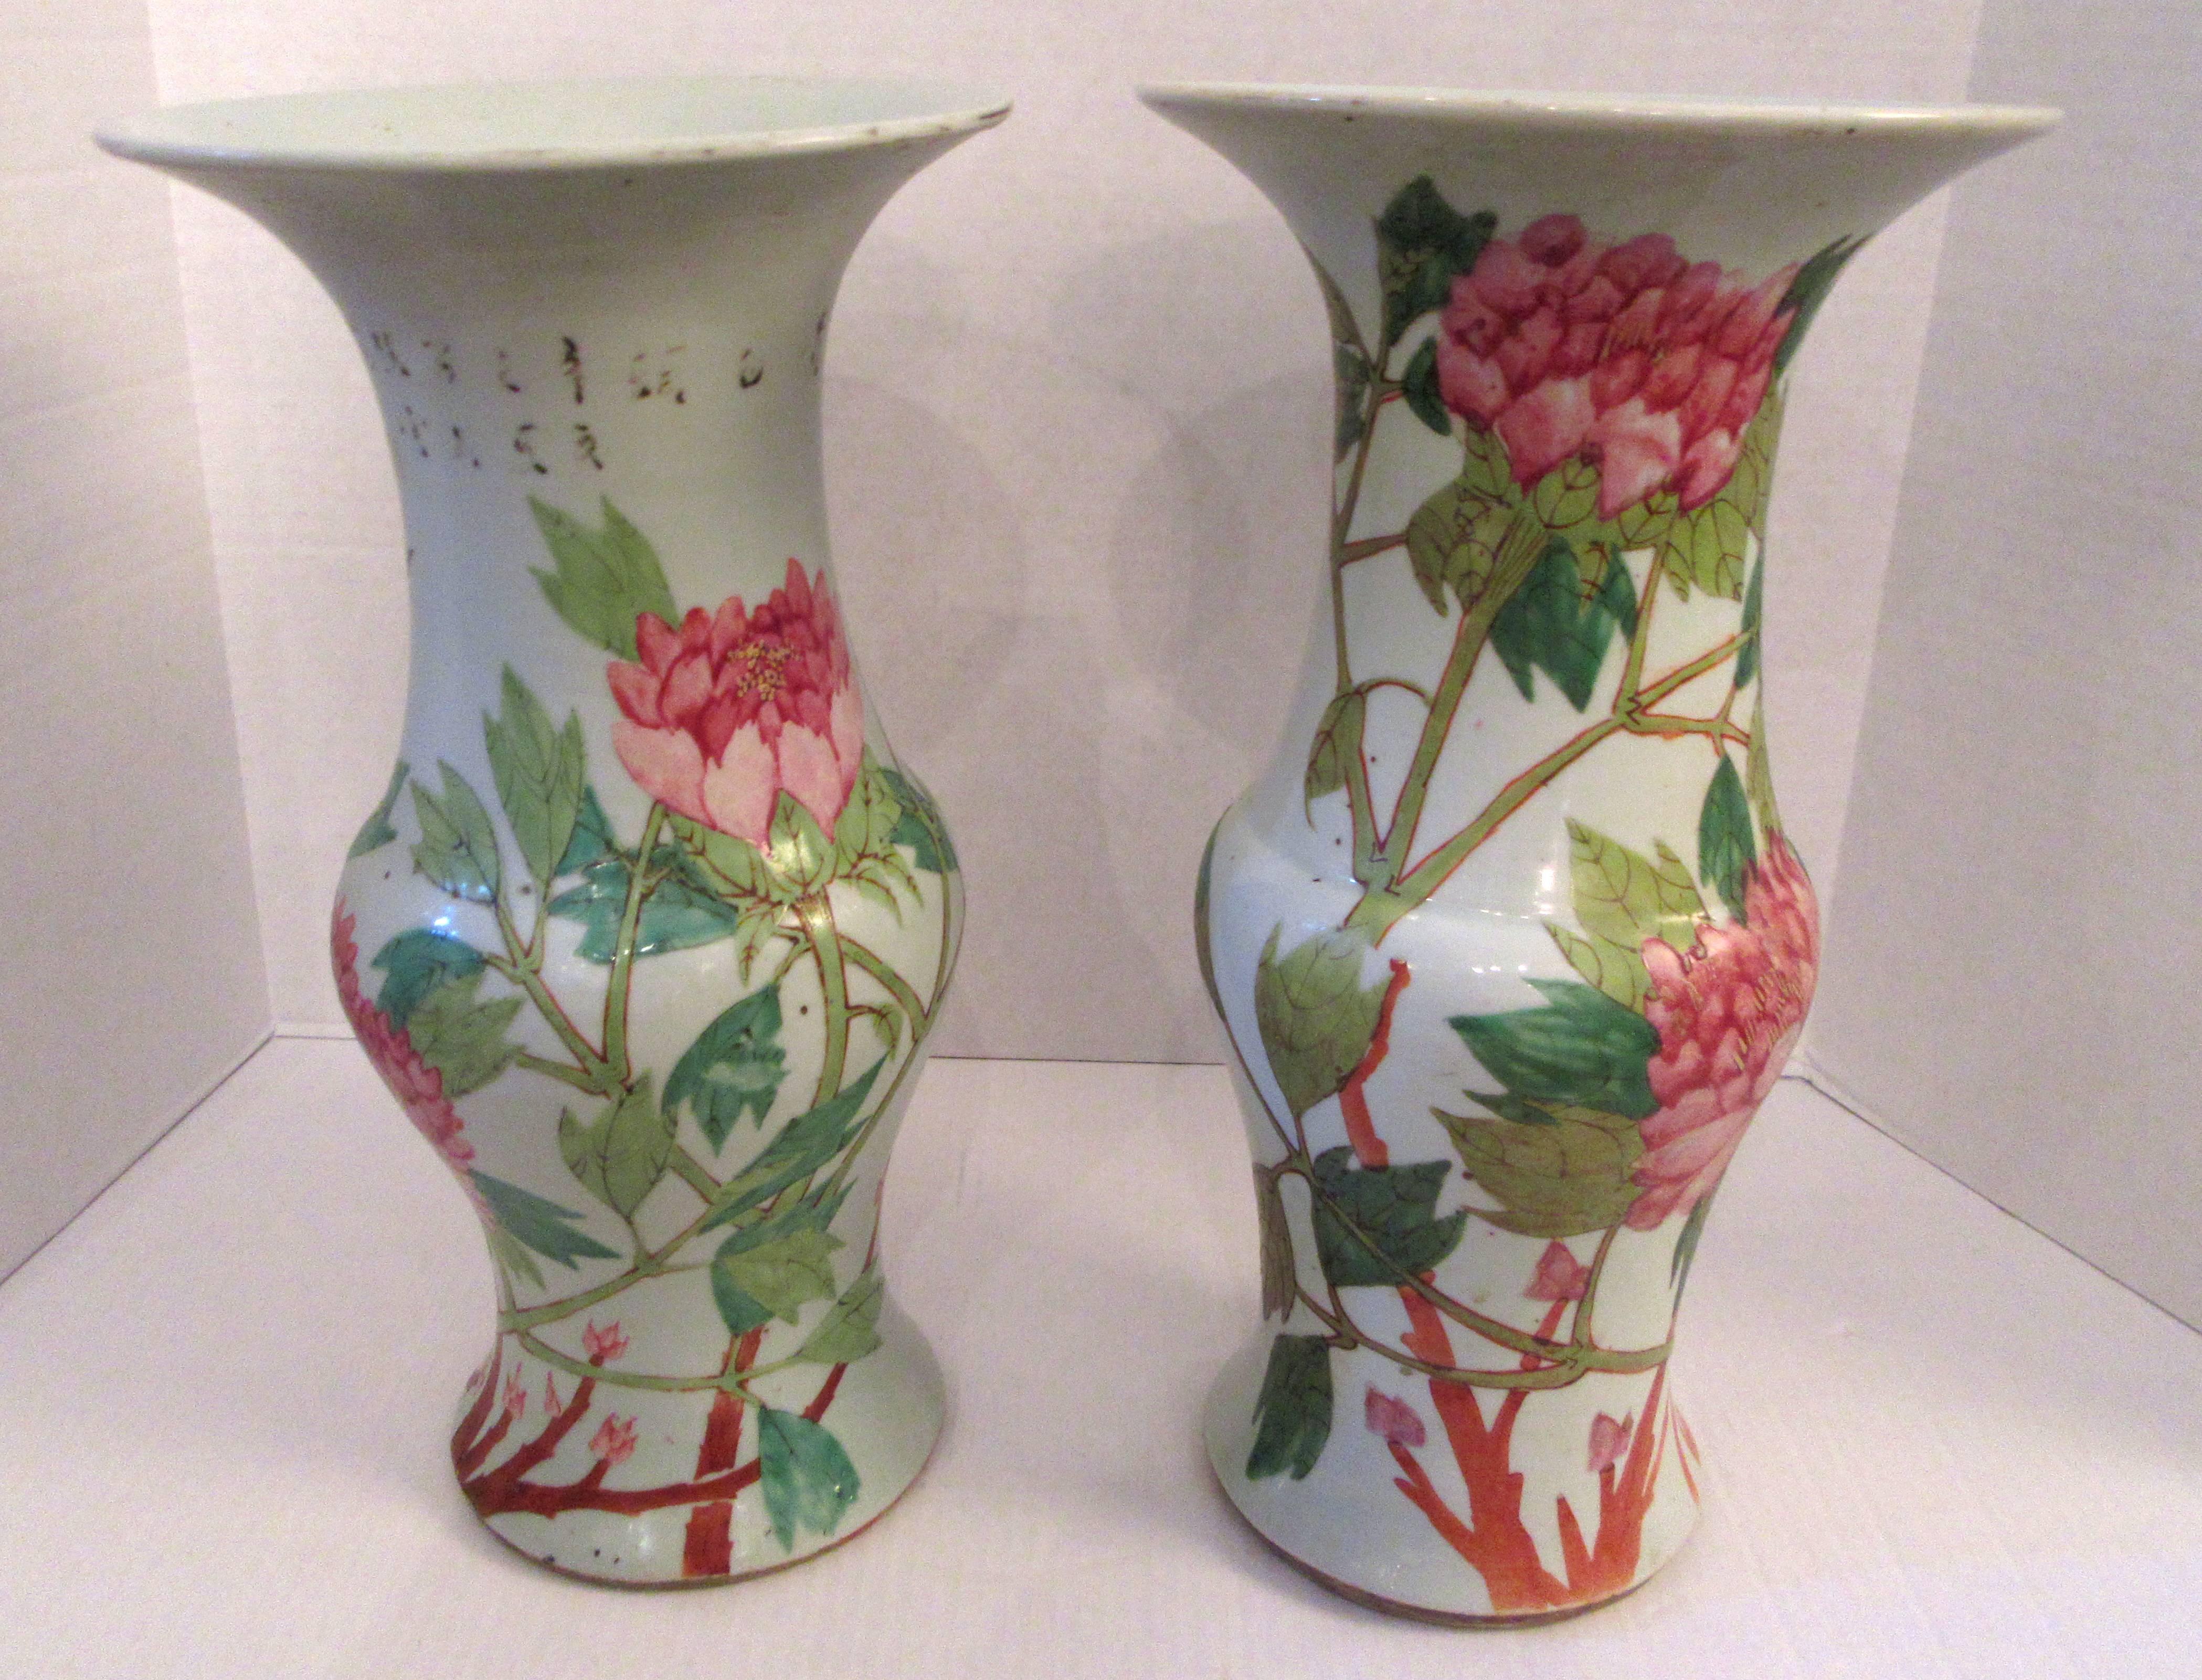 An associated pair of Chinese porcelain temple vase hand decorated with a pairs of Java rice finches on a branches. About the circumference large pink peony blossoms arise above leafy stems. The vase is considered to be from the Qing dynasty,